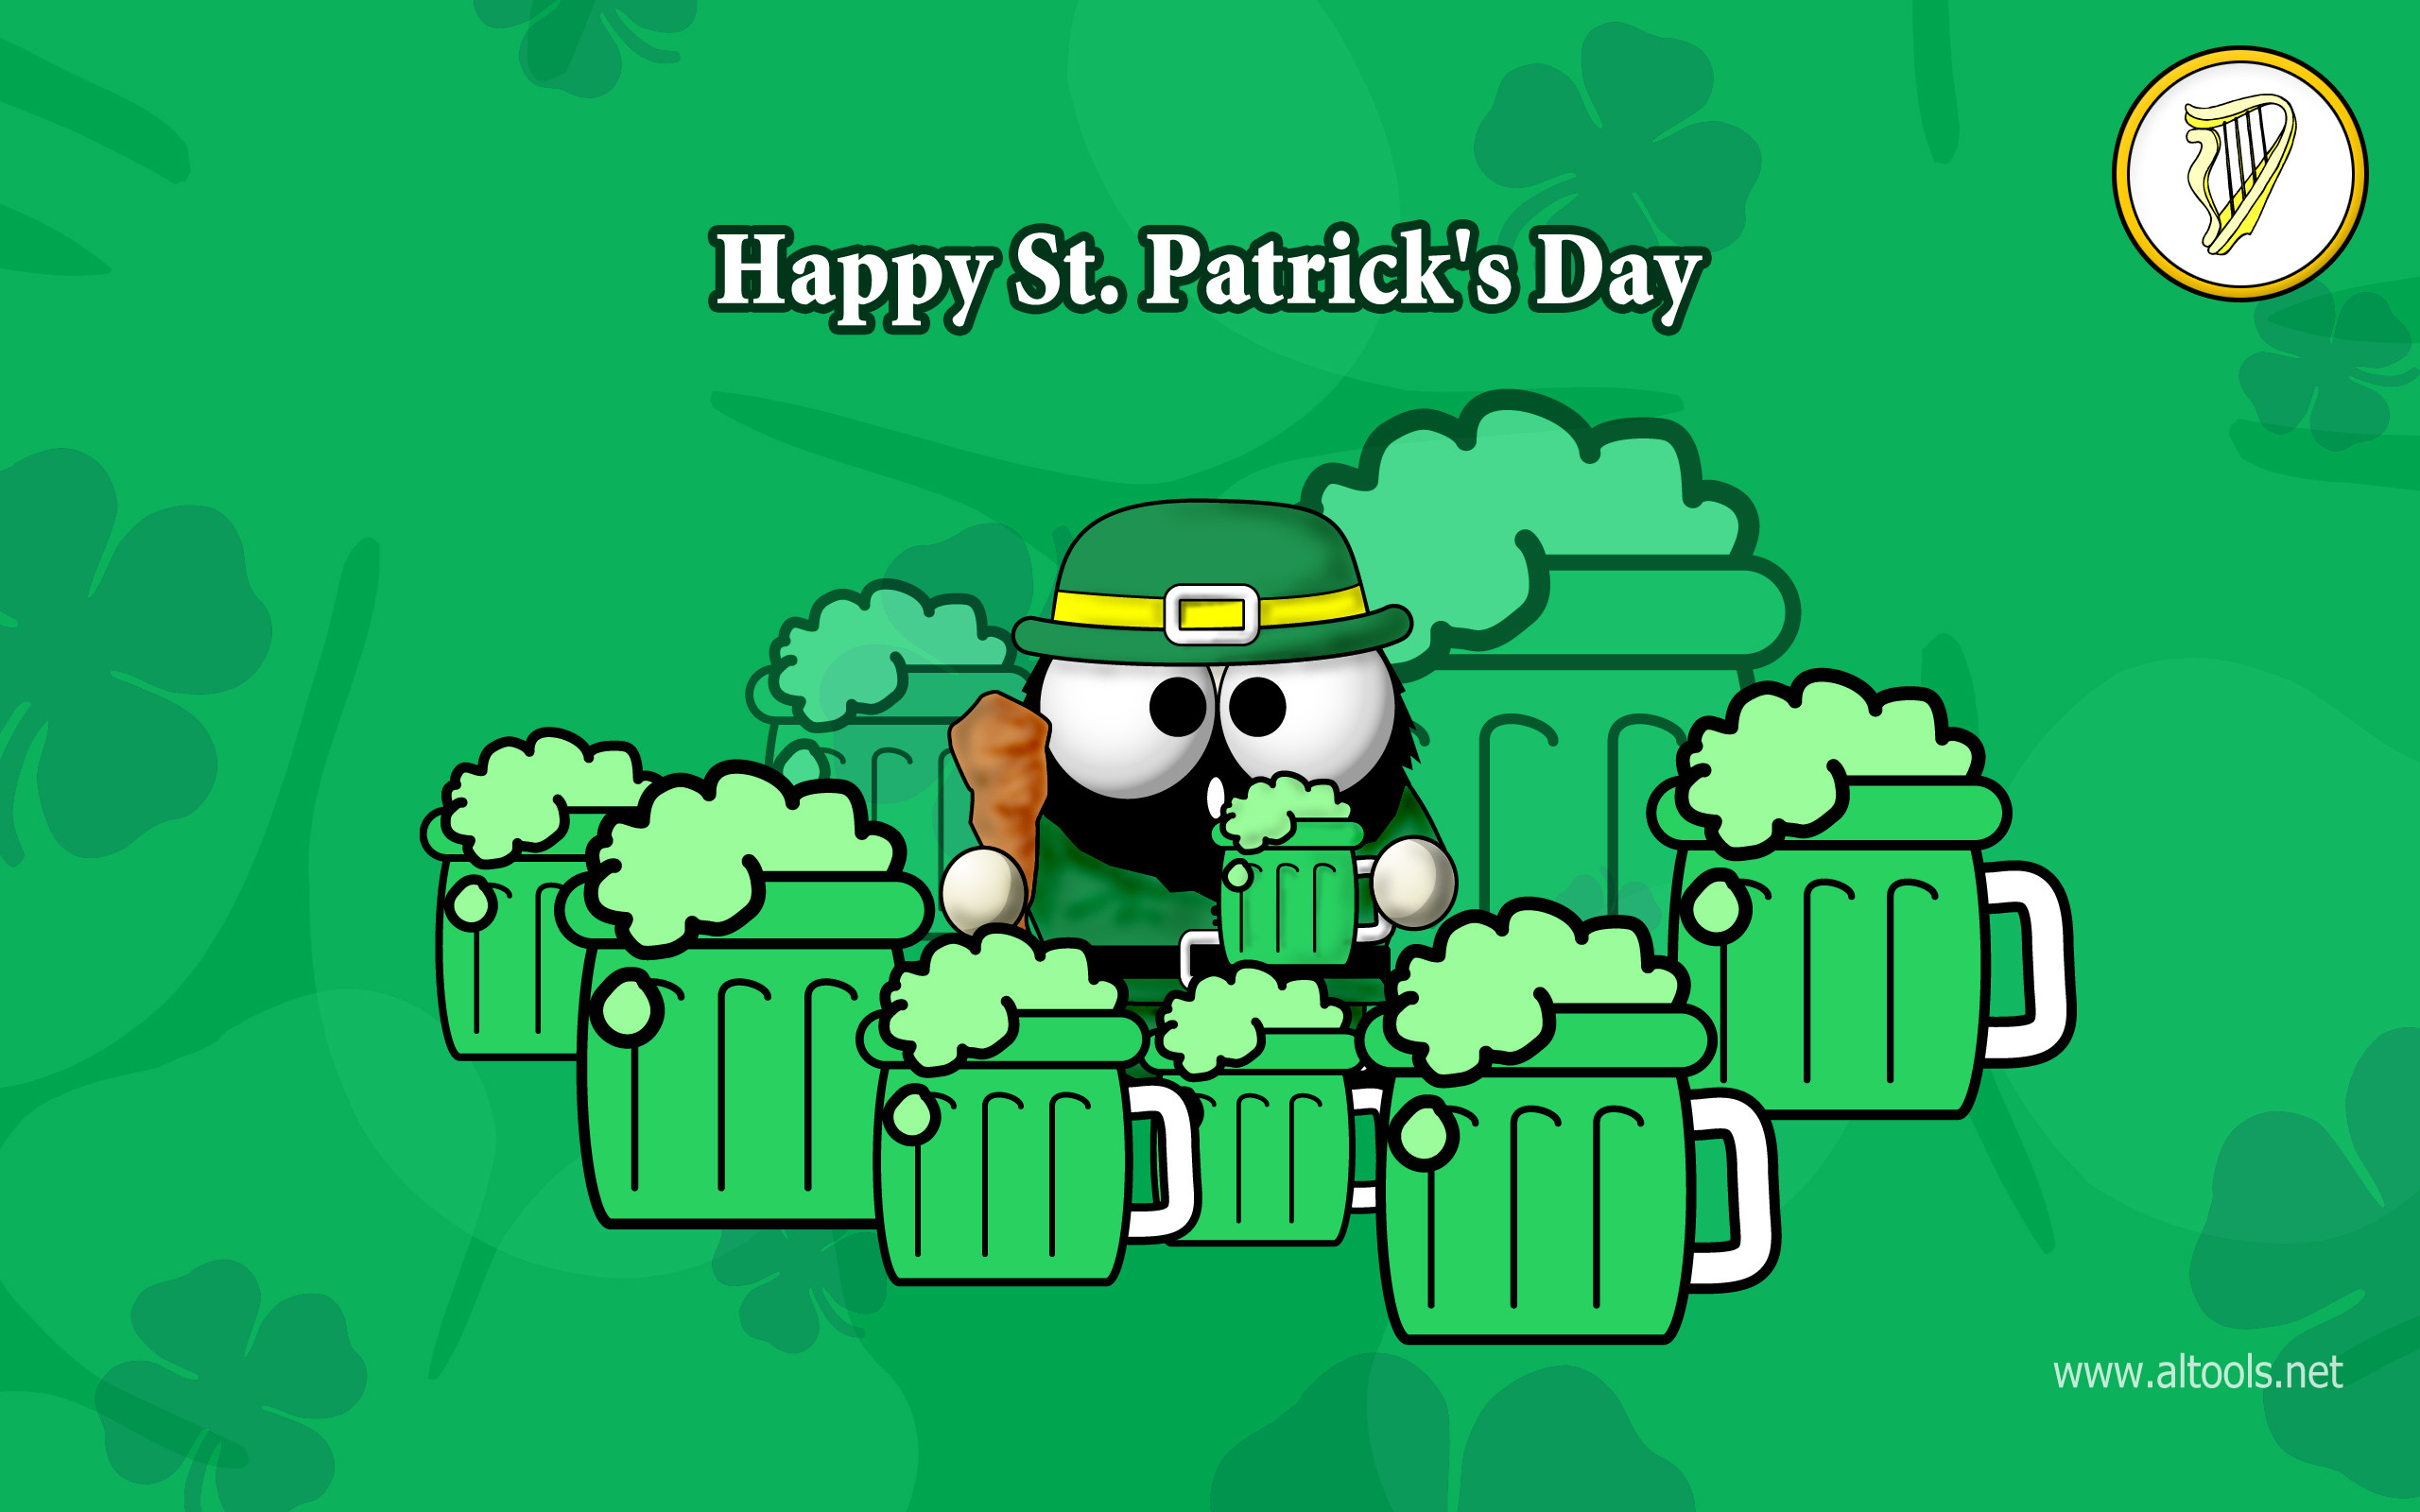 2560x1600 ALTools: St. Patricks Beer wallpapers and stock photos